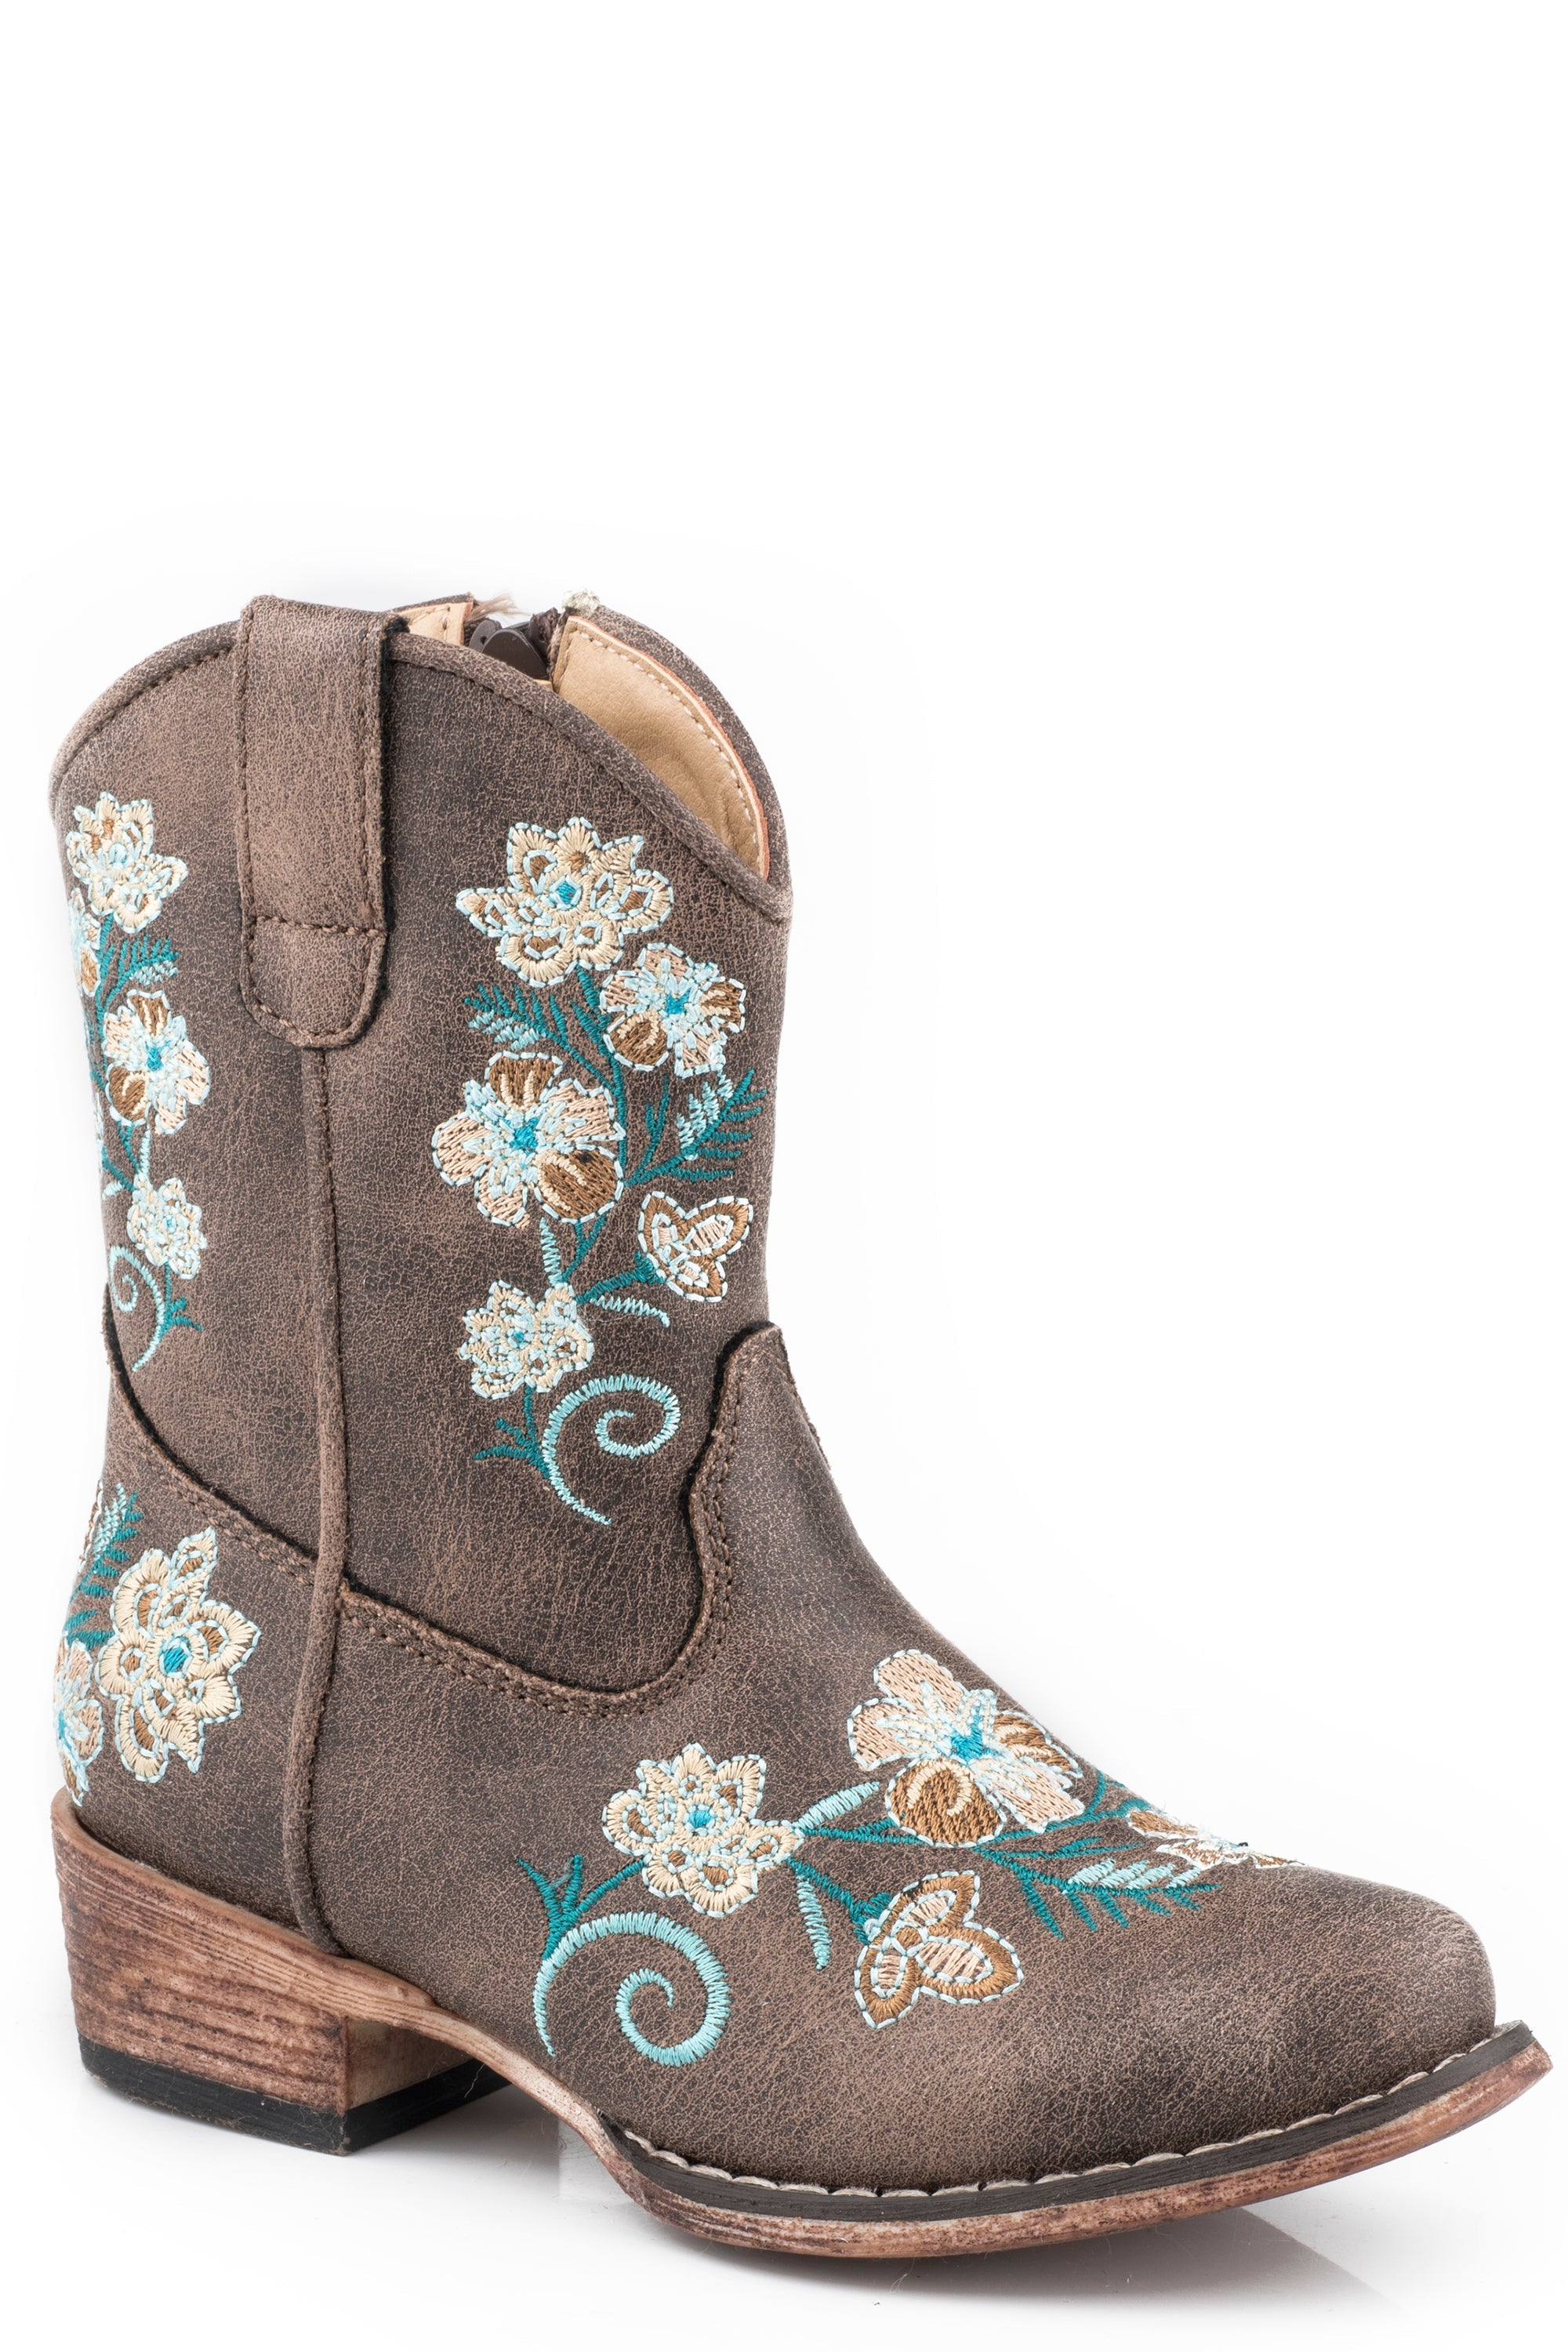 Roper Toddler Girls Vintage Brown Faux Leather Boot With Floral Embroidery Vamp  Shaft